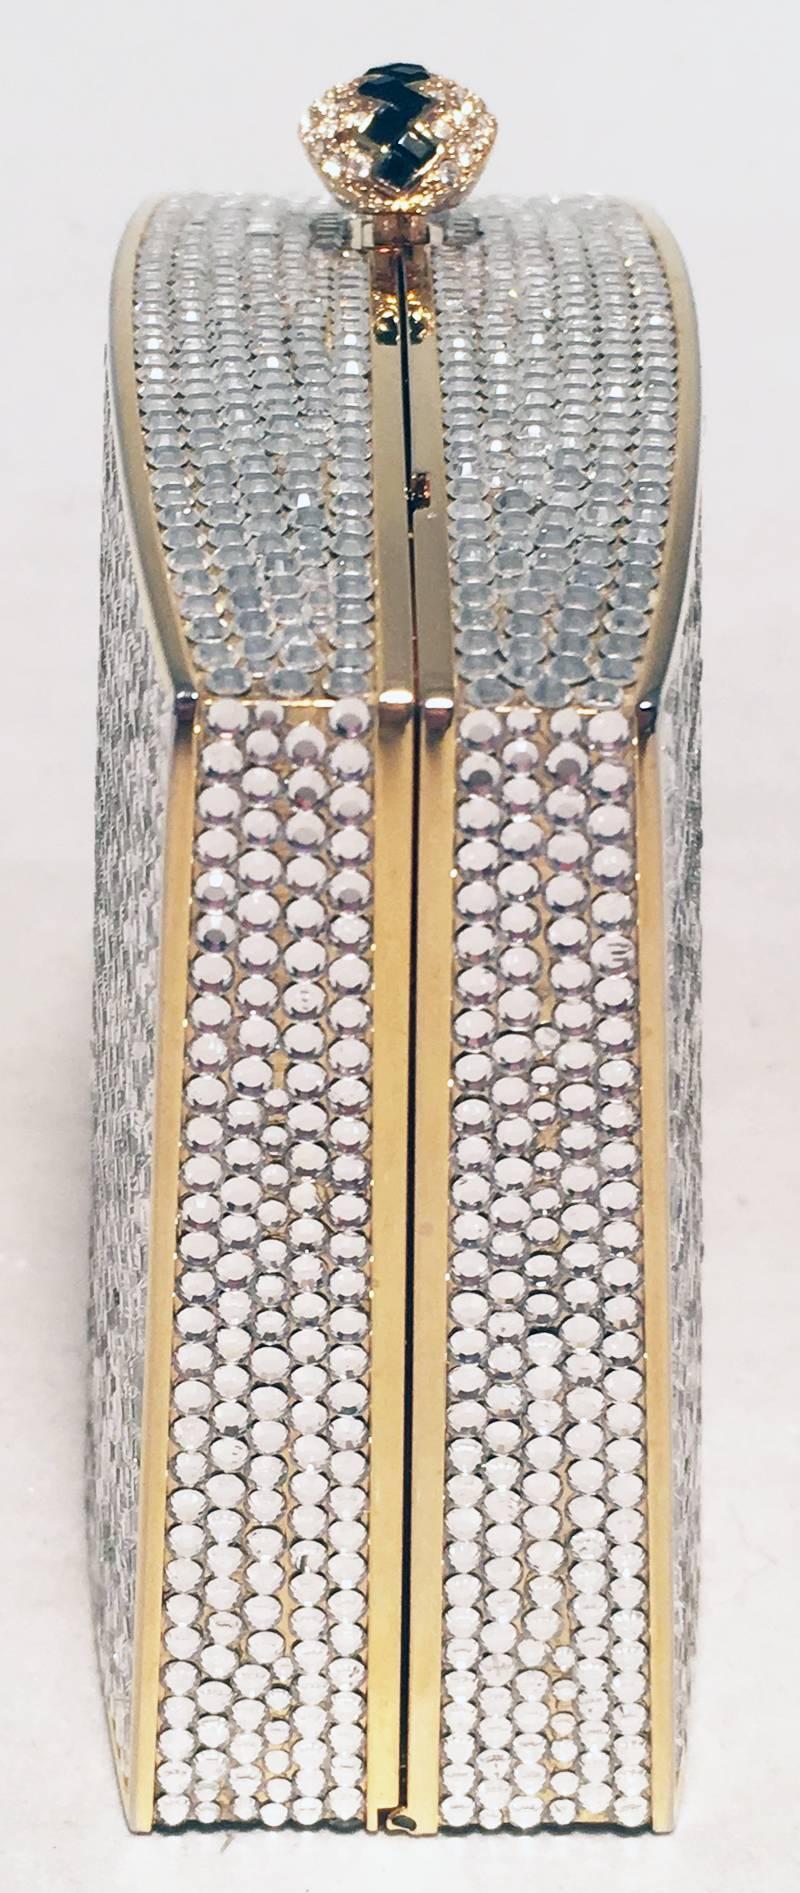 Judith Leiber Clear Swarovski Crystal Minaudiere Evening Bag Clutch in excellent condition.  Clear swarovski crystal exterior over a gold solid form body.  Top embellished crystal button closure opens to a gold leather lined interior that holds an